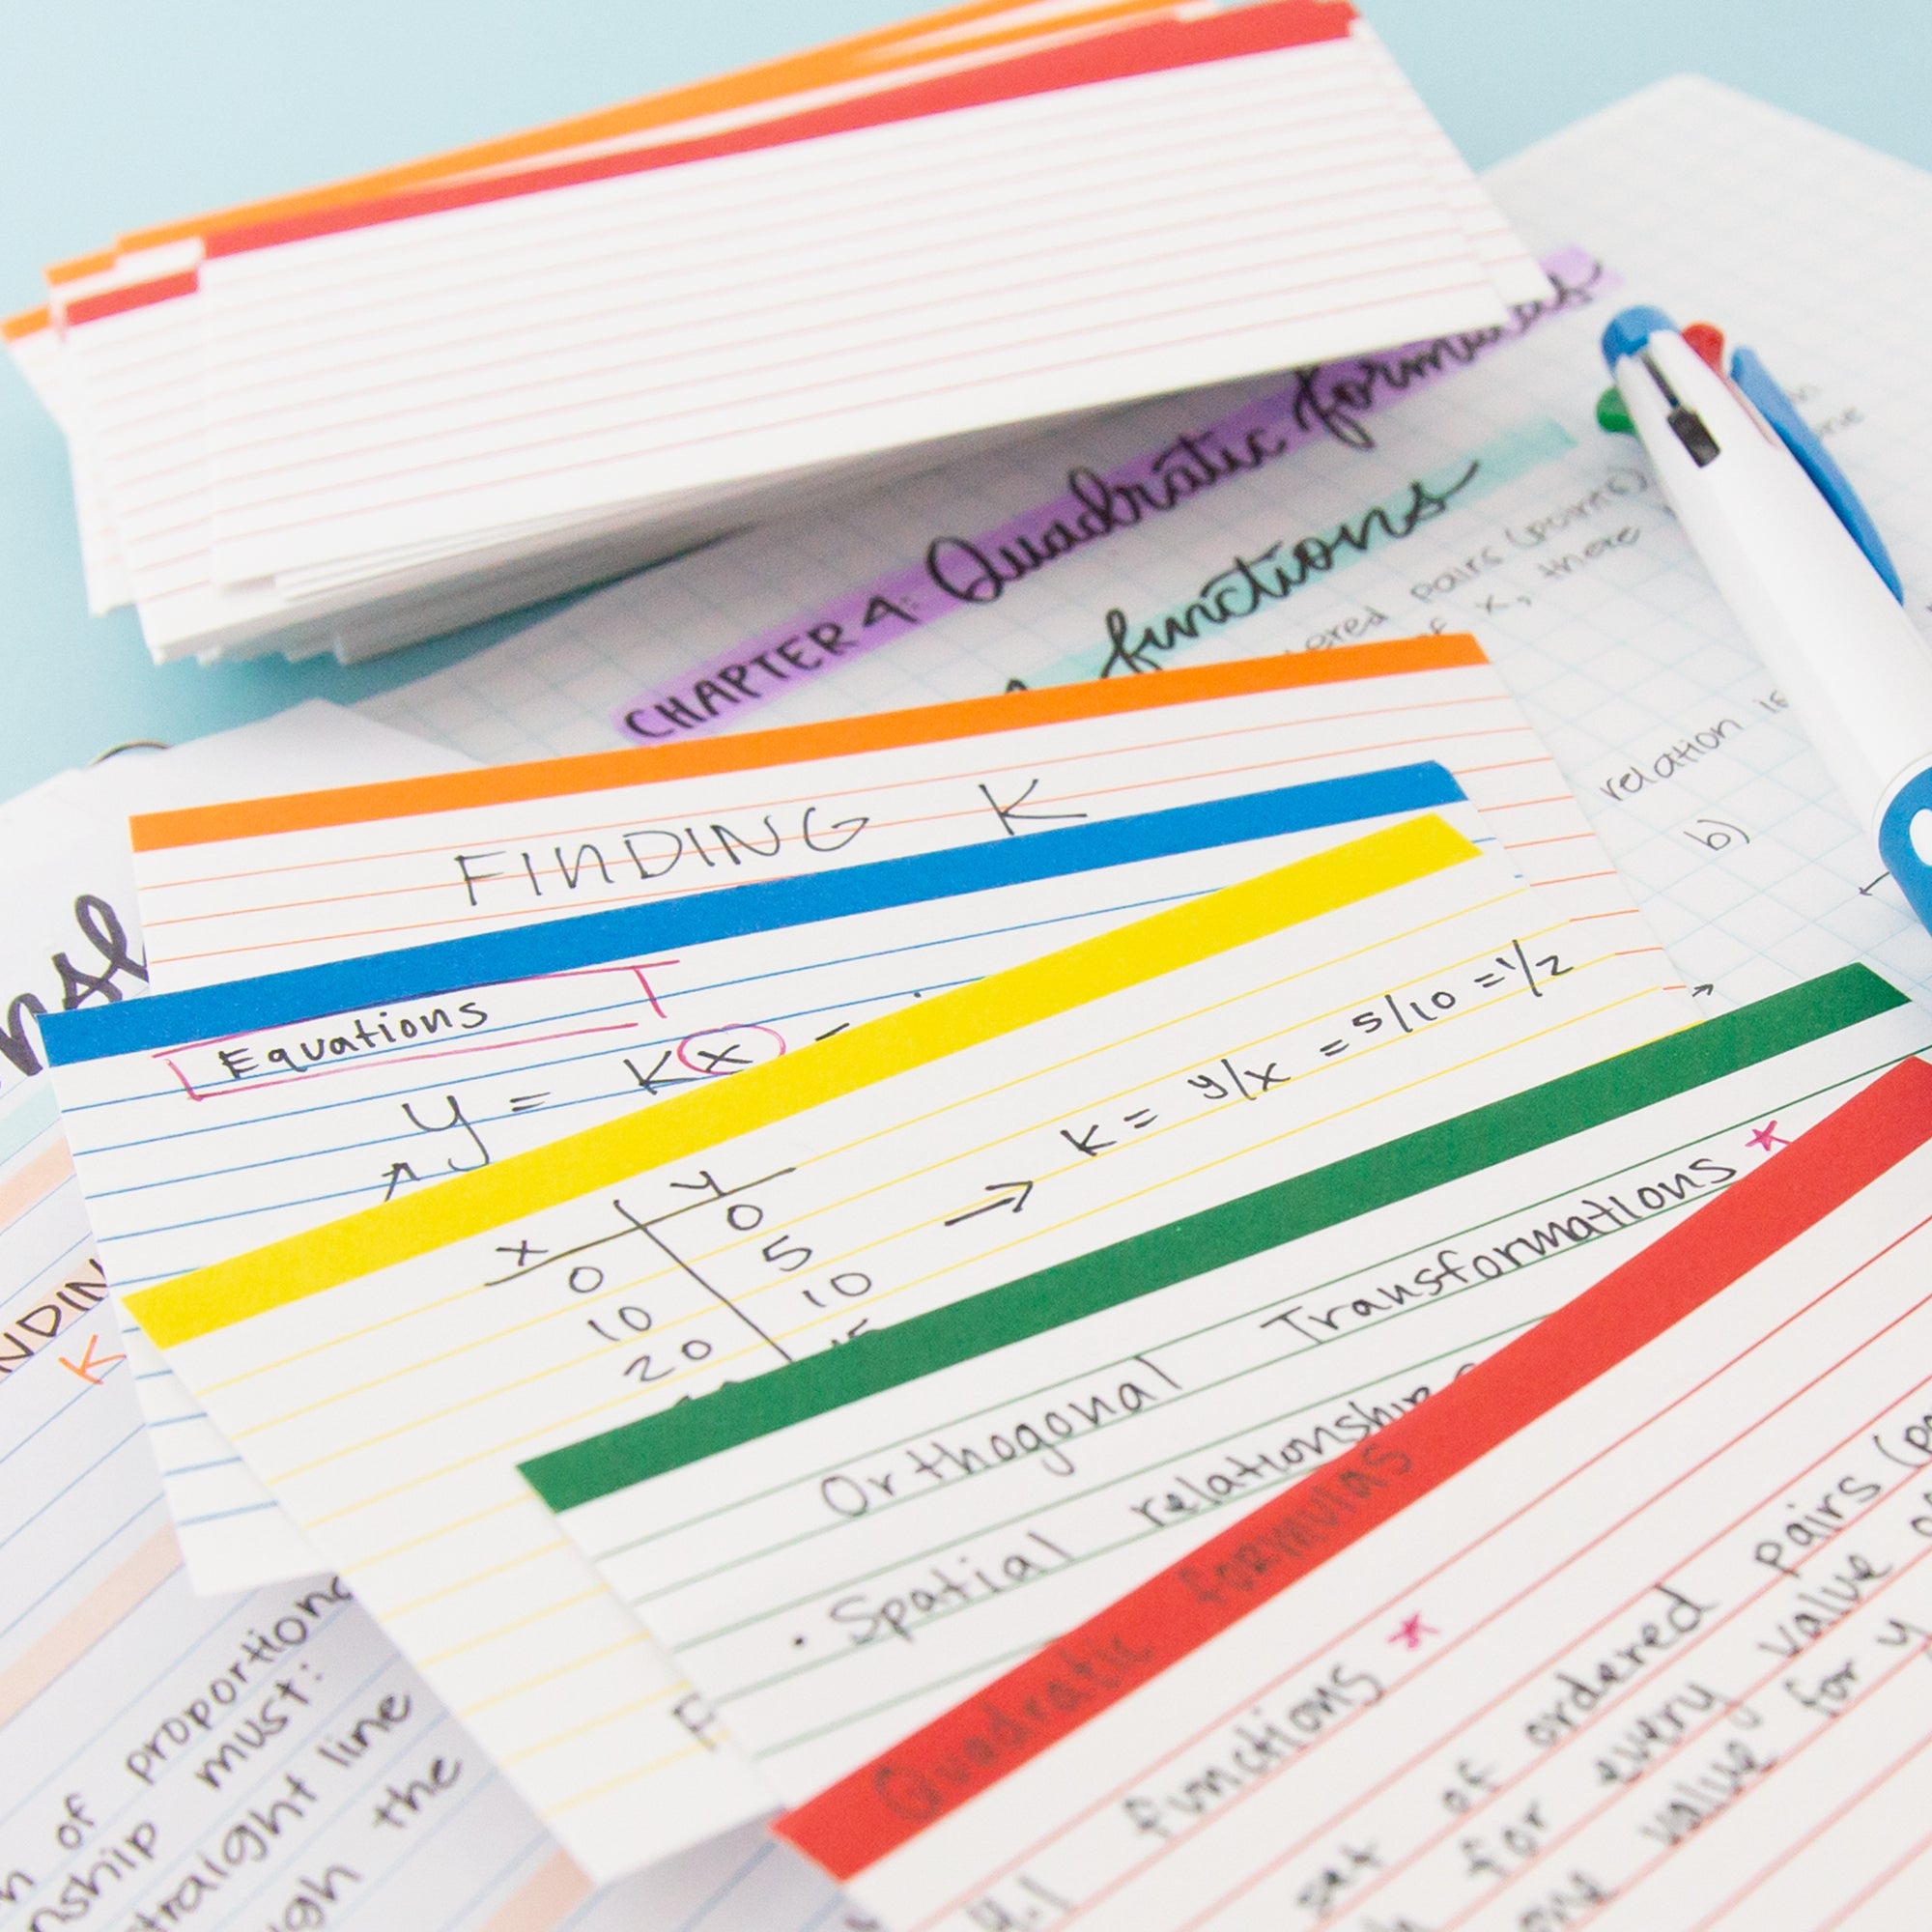 Oxford Color Coded Ruled Index Cards 3 X 5 Assorted Colors 100 Per